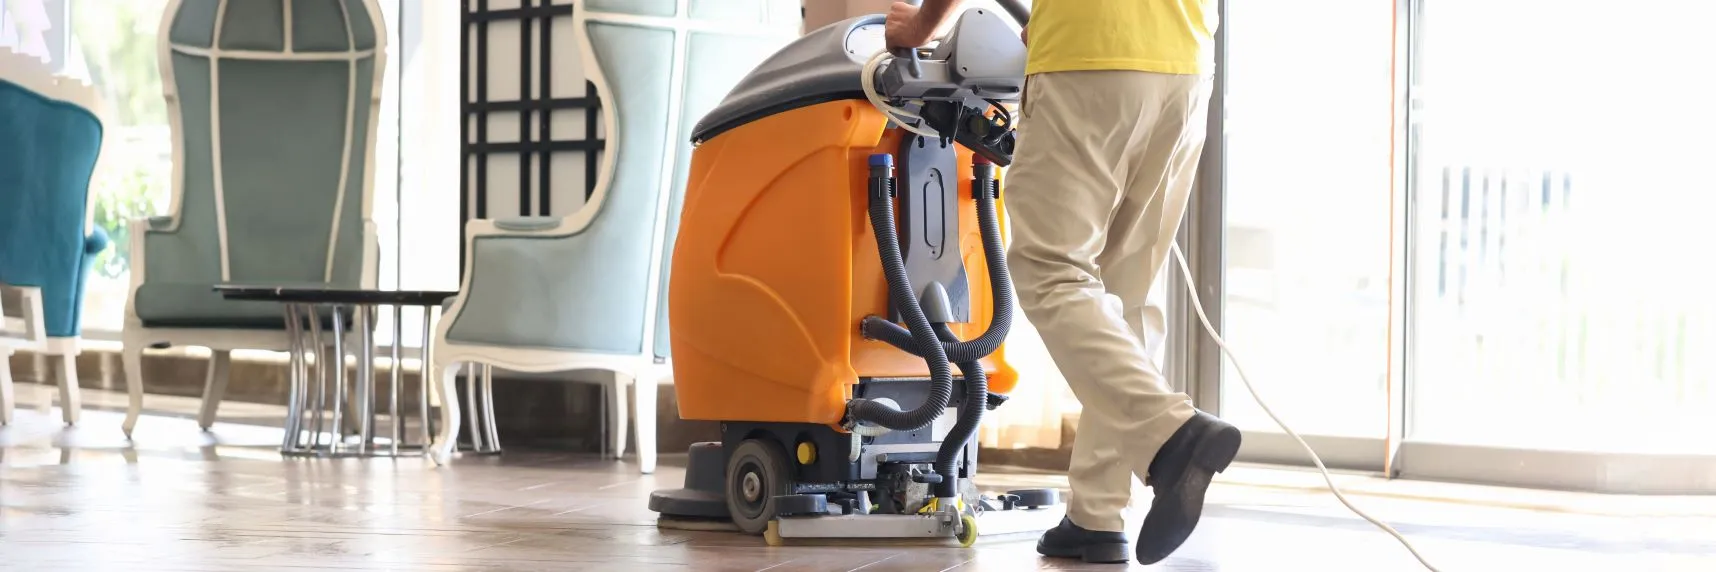 A janitor from a cleaning services company is cleaning the hall with a vacuum cleaner